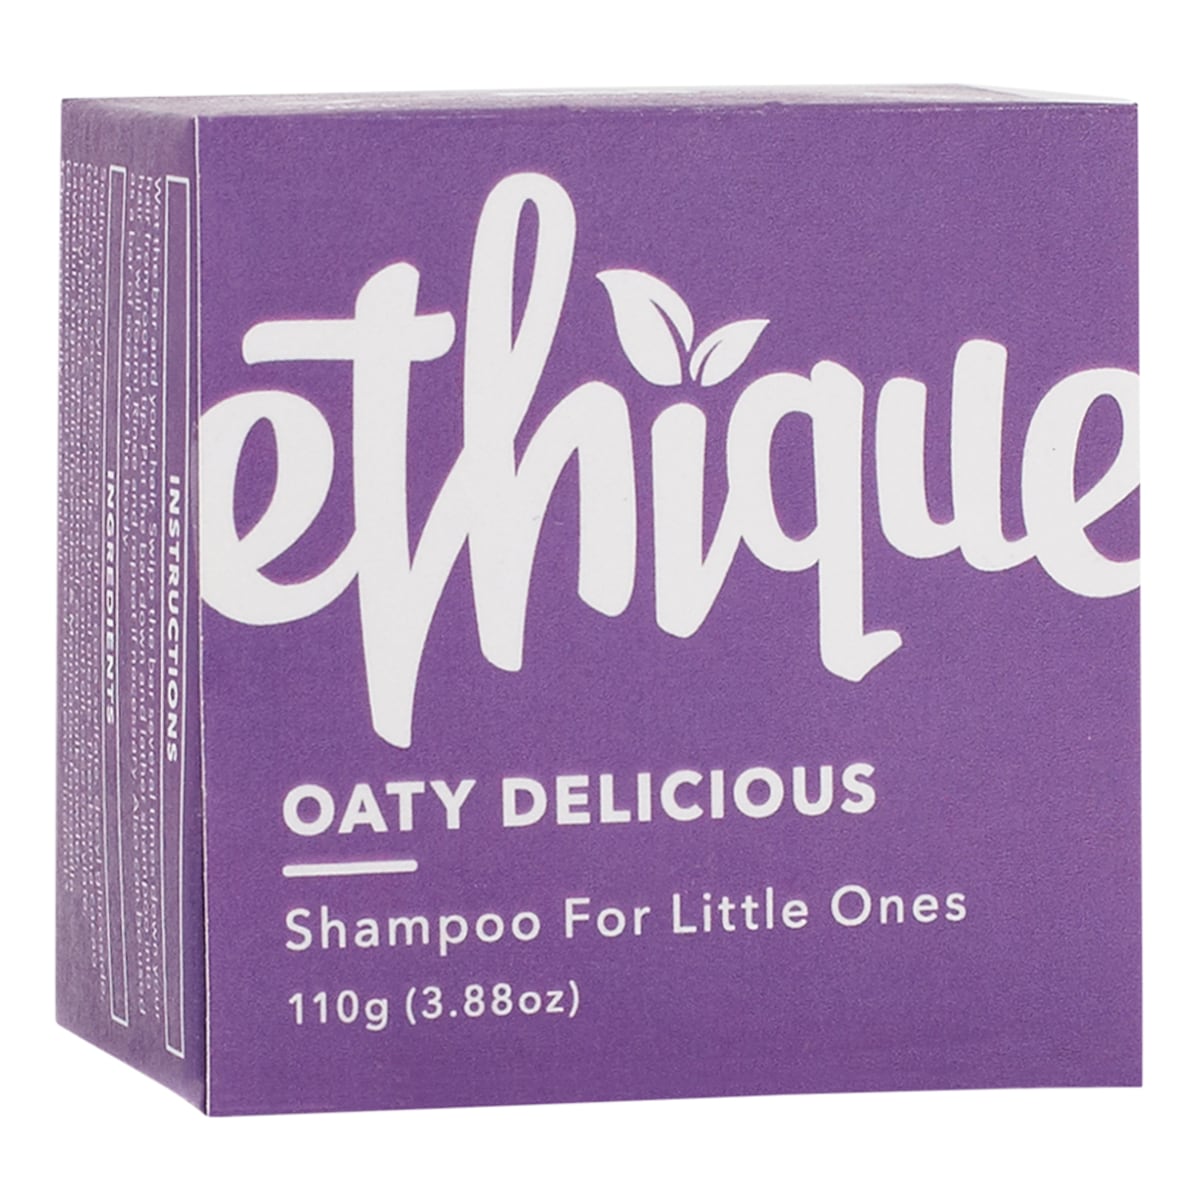 Ethique Solid Shampoo Bar Oaty Delicious 110G